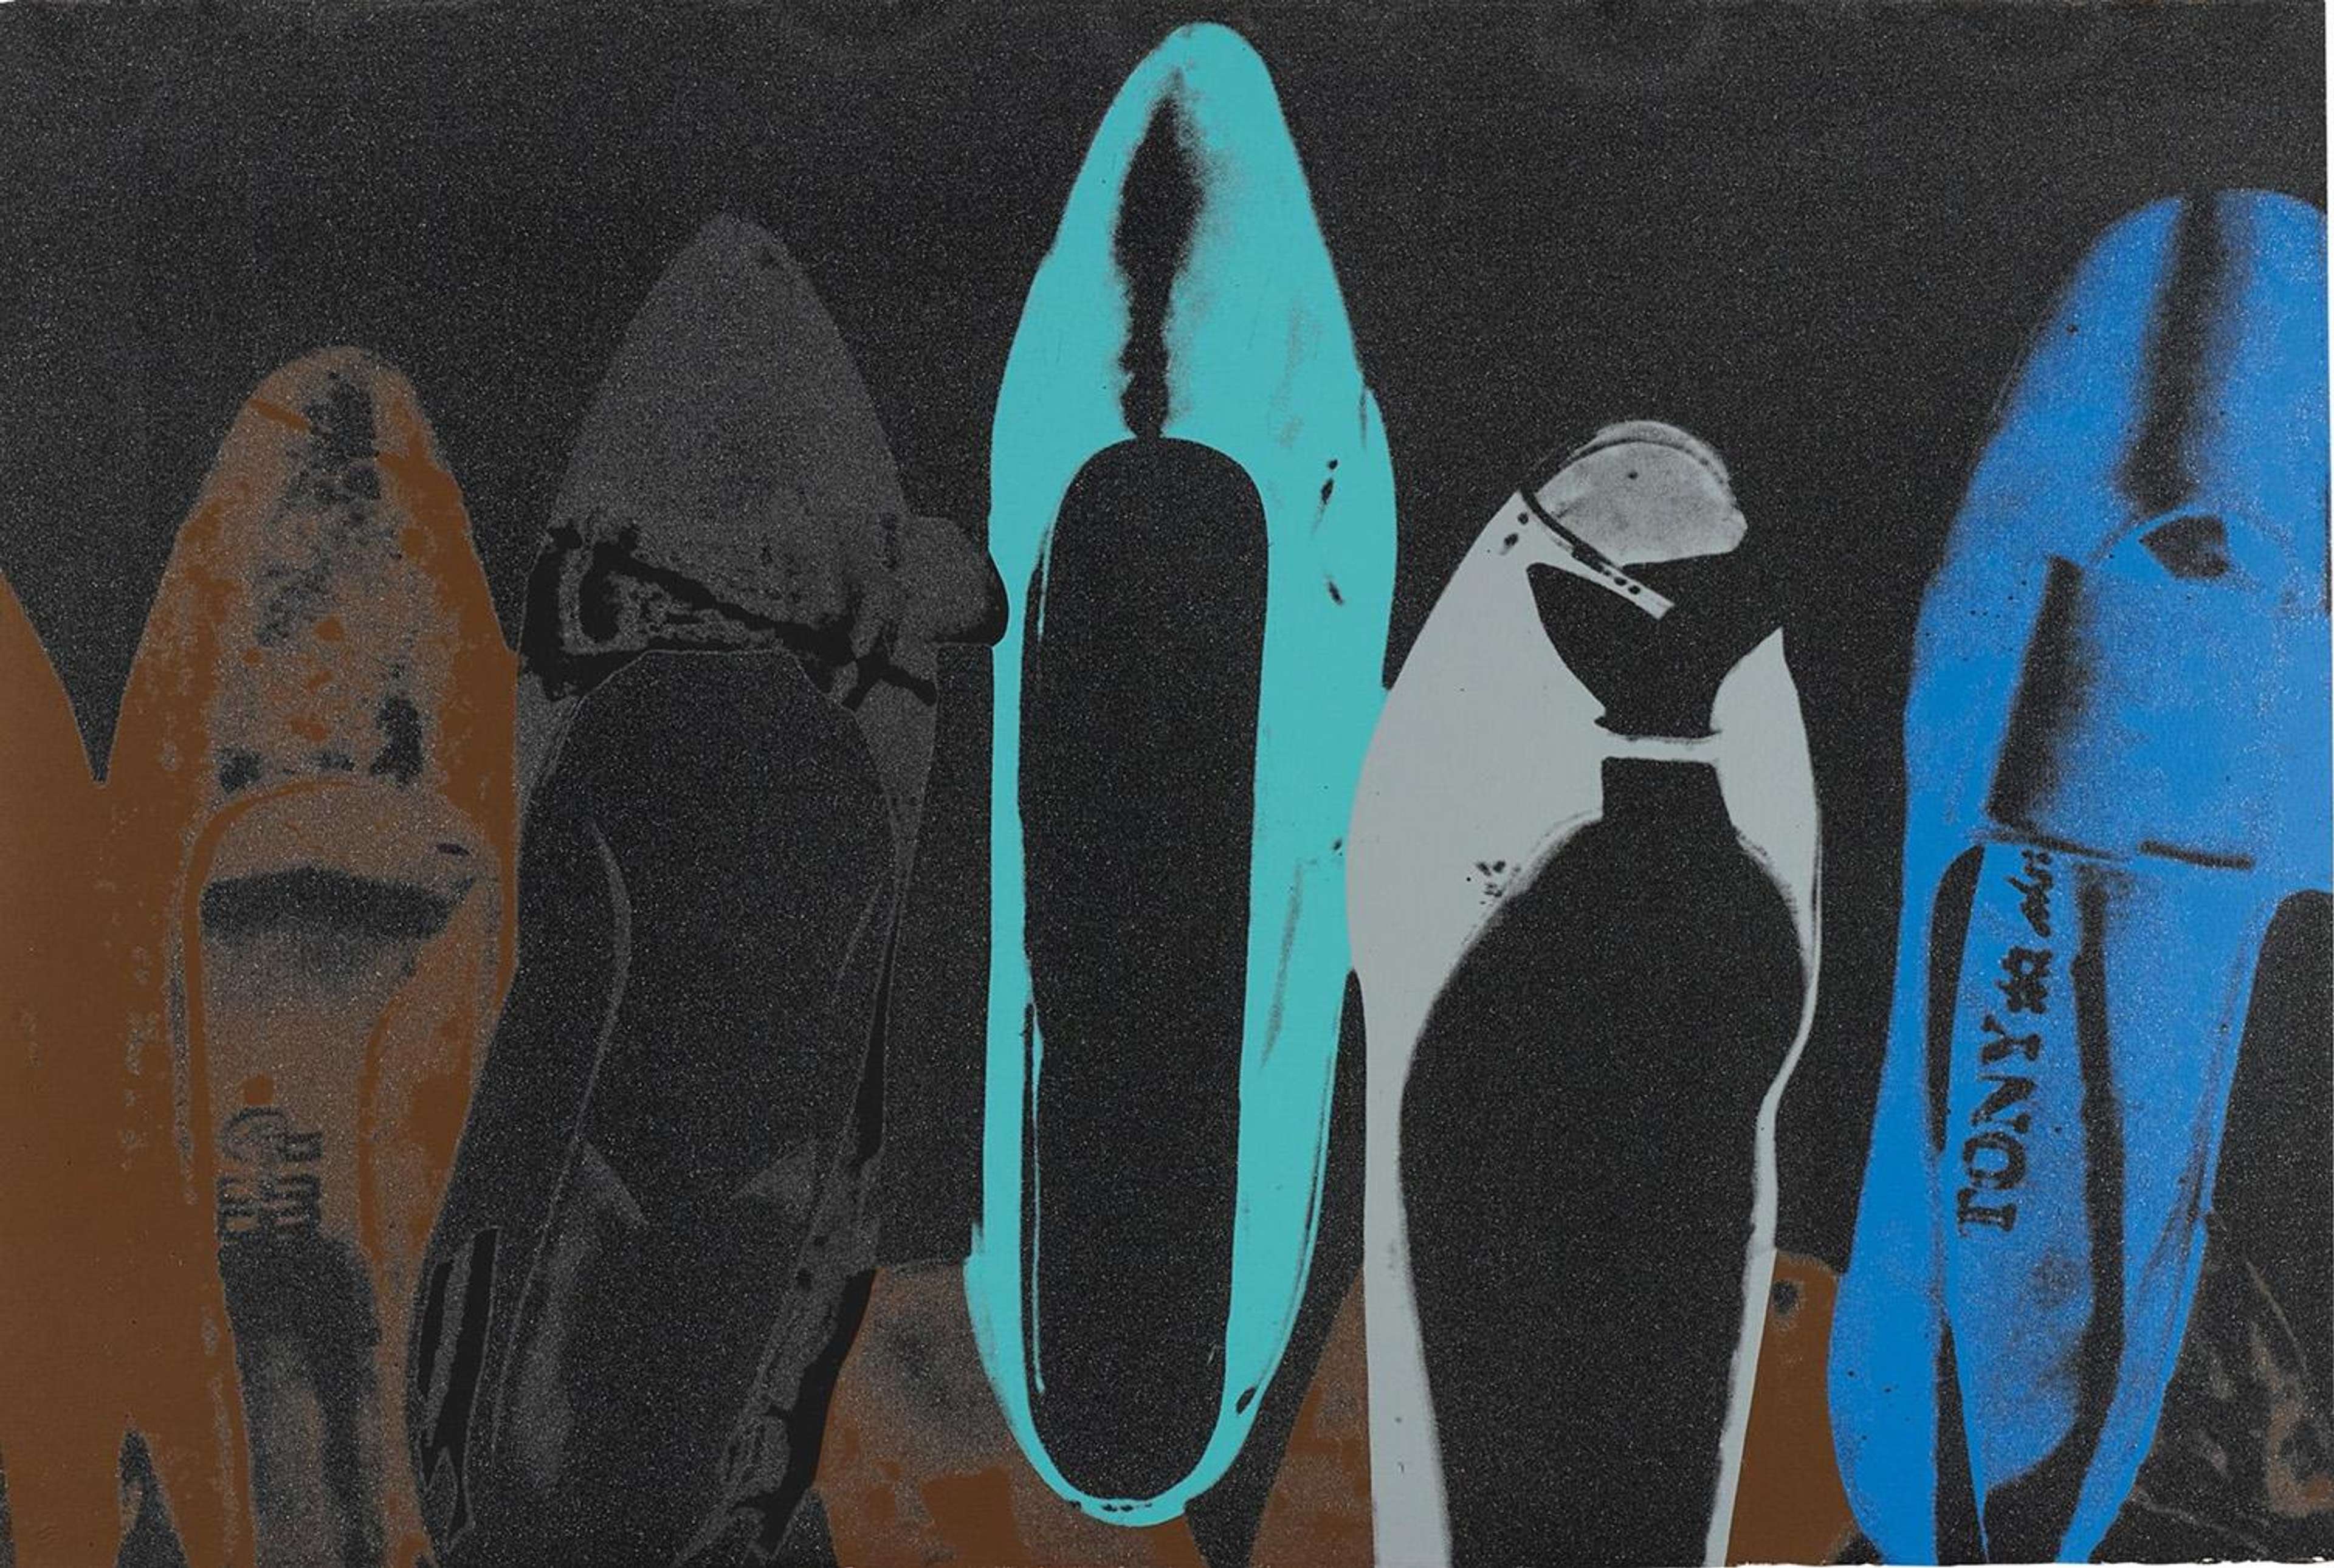 The print depicts five high heel shoes in a line, rendered in various cool colours against a black backdrop. Attention is drawn towards the bright turquoise shoe that occupies the centre of the composition. The shoes are bookended by a rusty orange shoe and a royal blue shoe. Spread over the canvas is a shimmering of diamond dust.